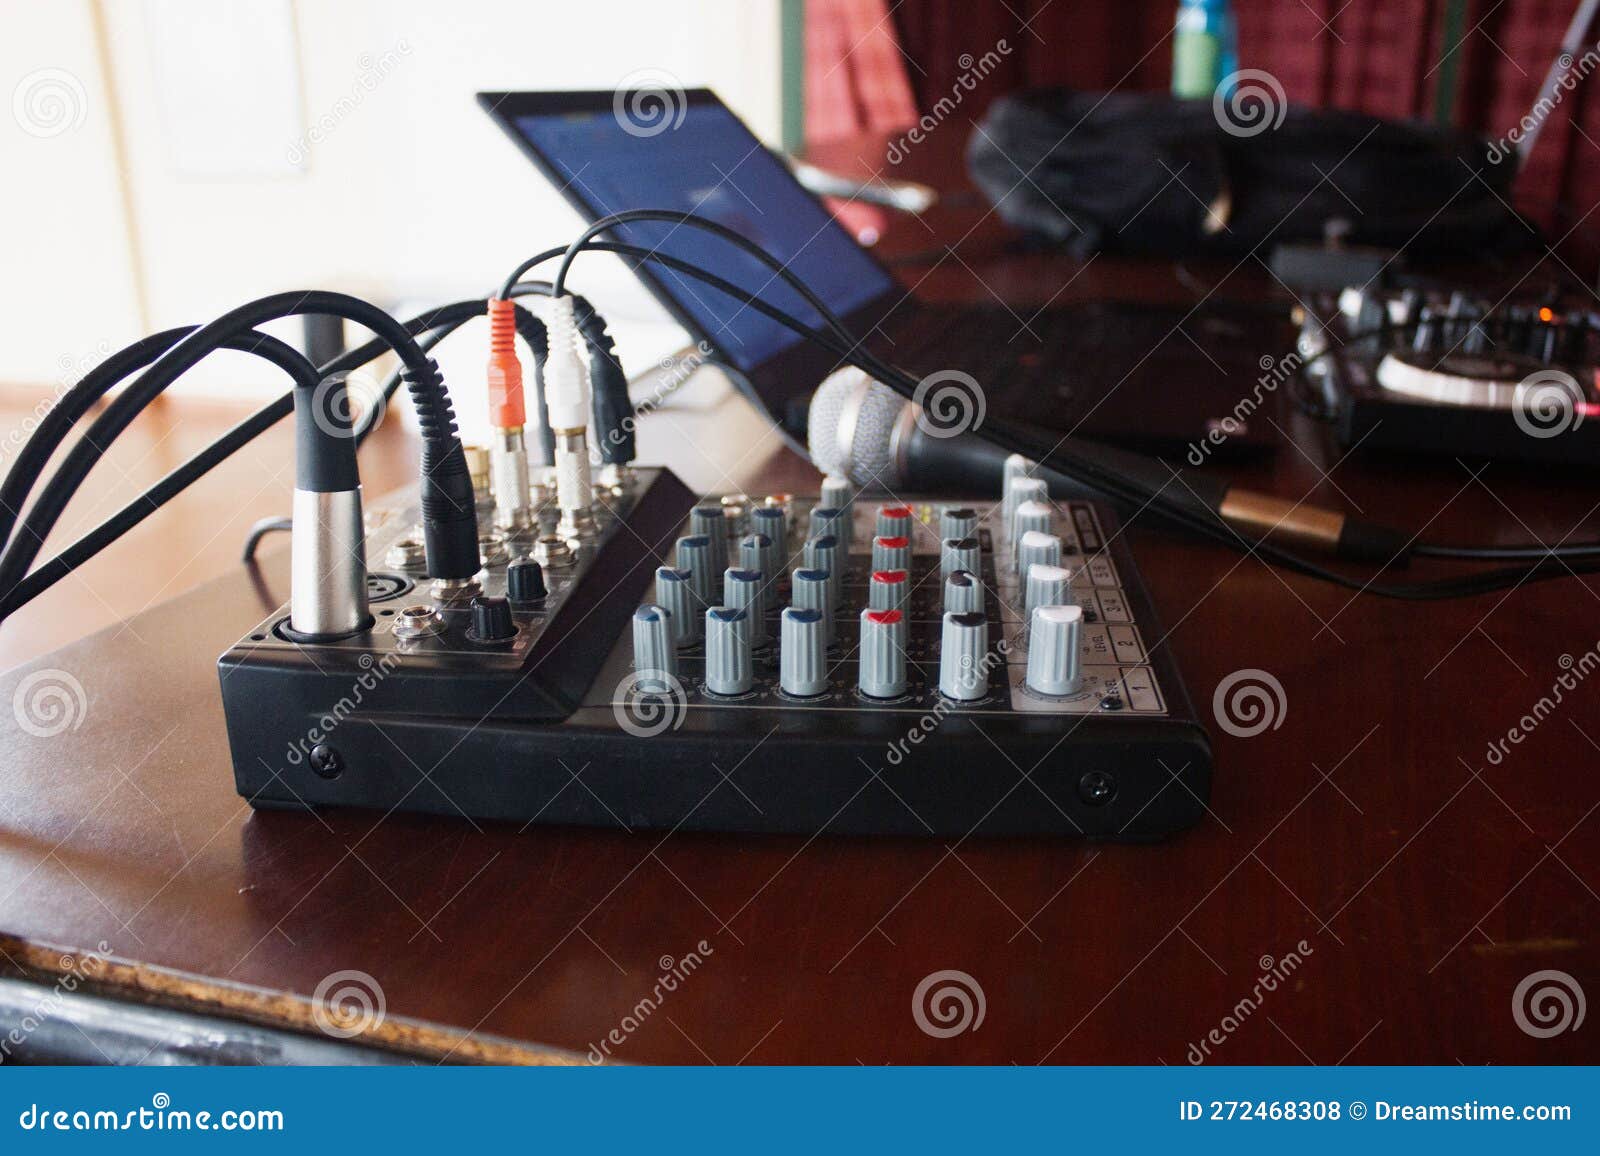 sound mixer on a table in a recording studio, close-up